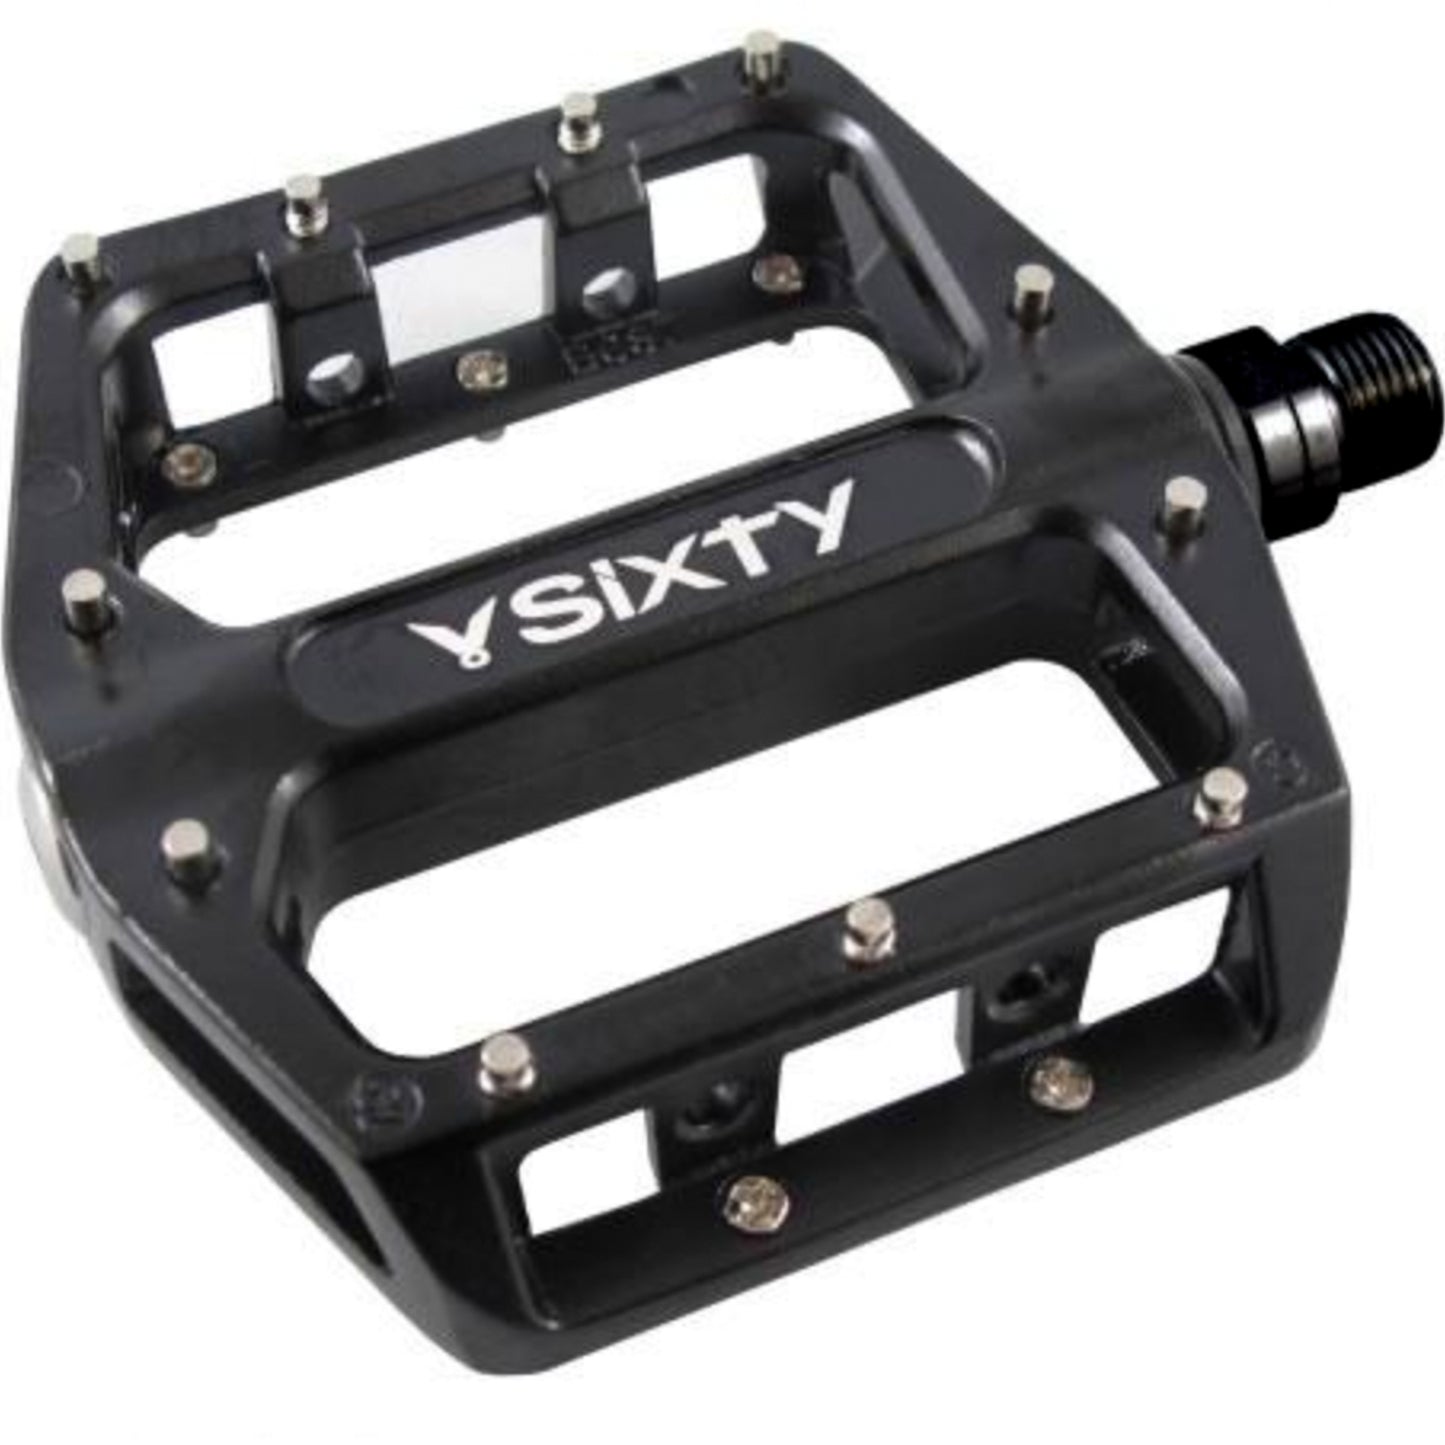 V-Sixty B-87 Pedal with Sealed Bearings, Black